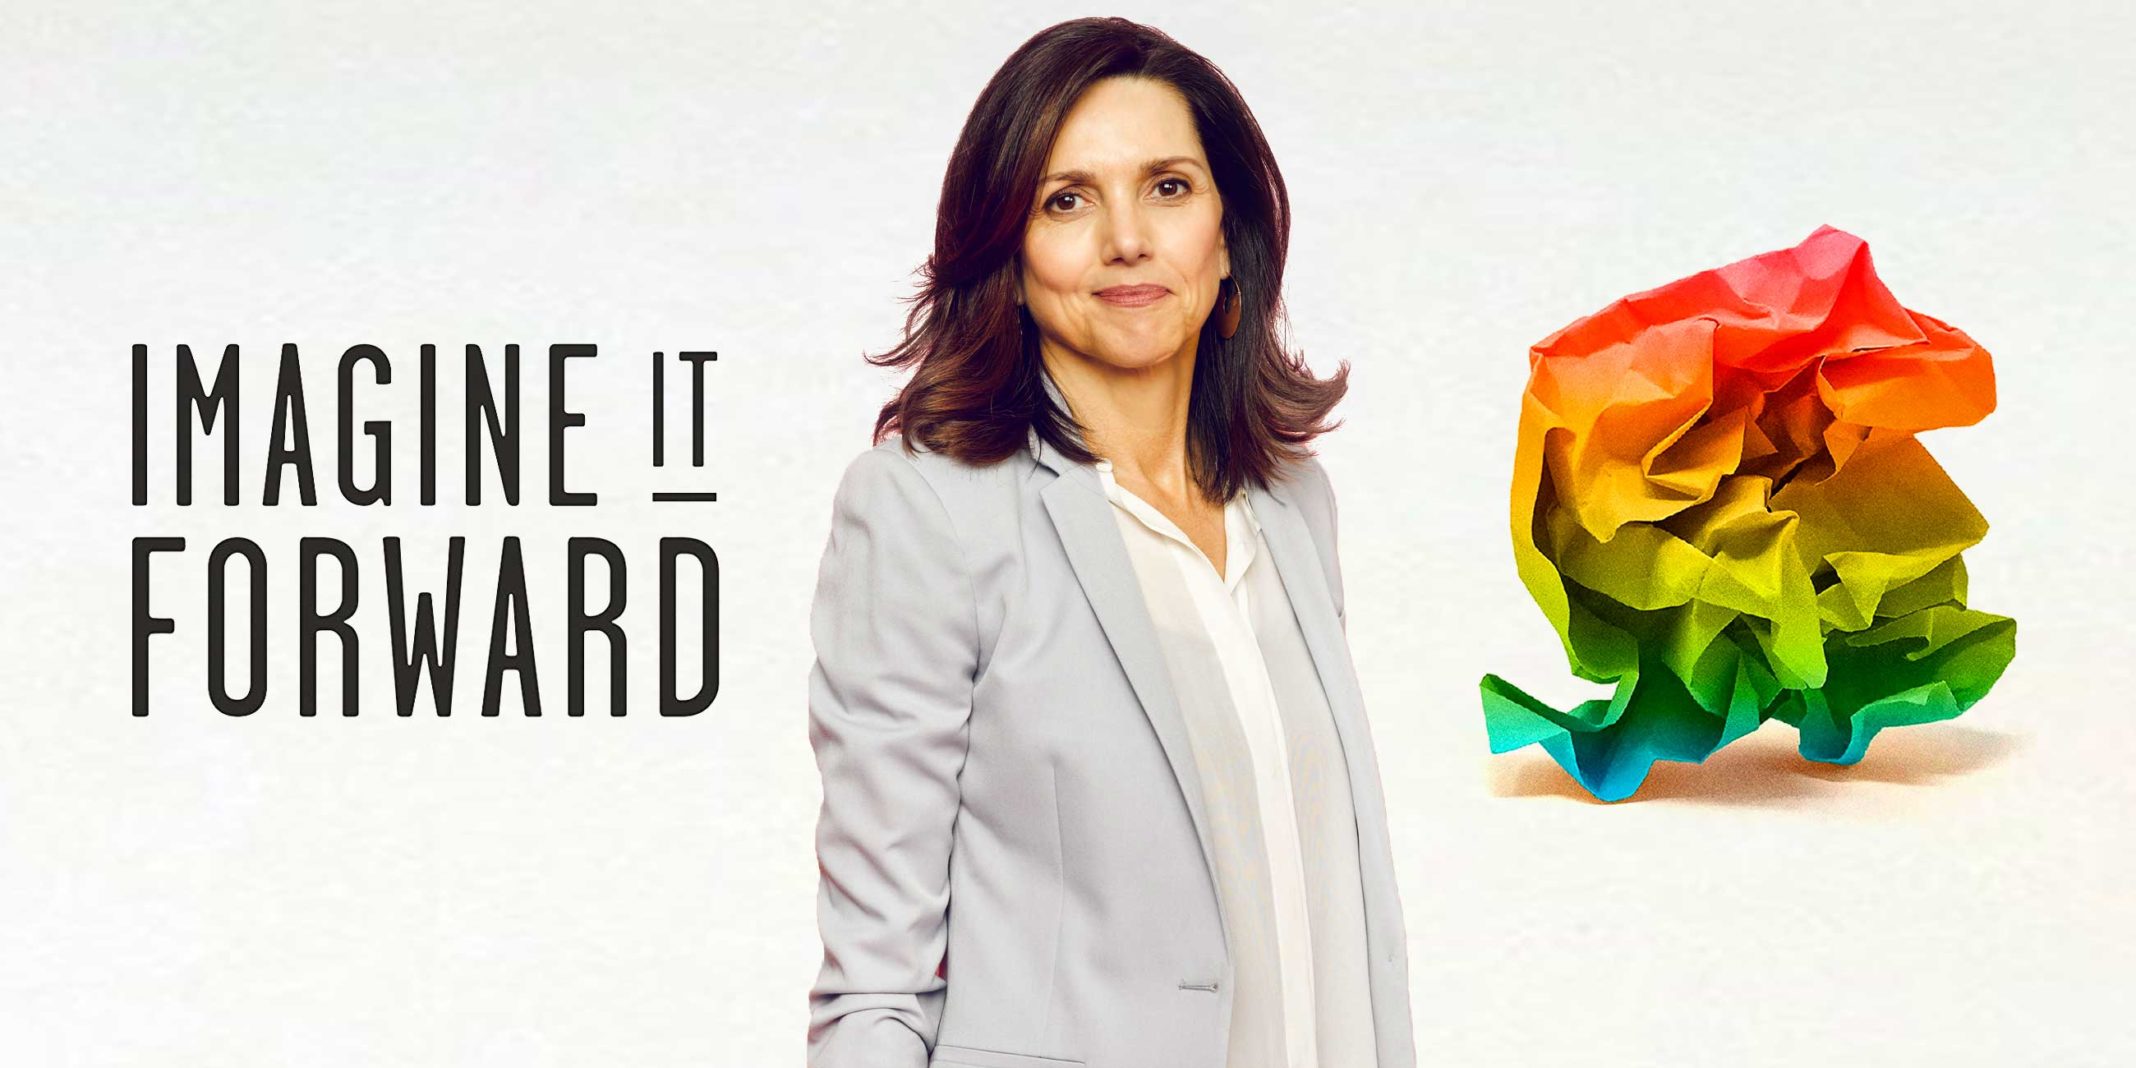 18 Inspirational Quotes From Beth Comstock's Book 'Imagine It Forward'